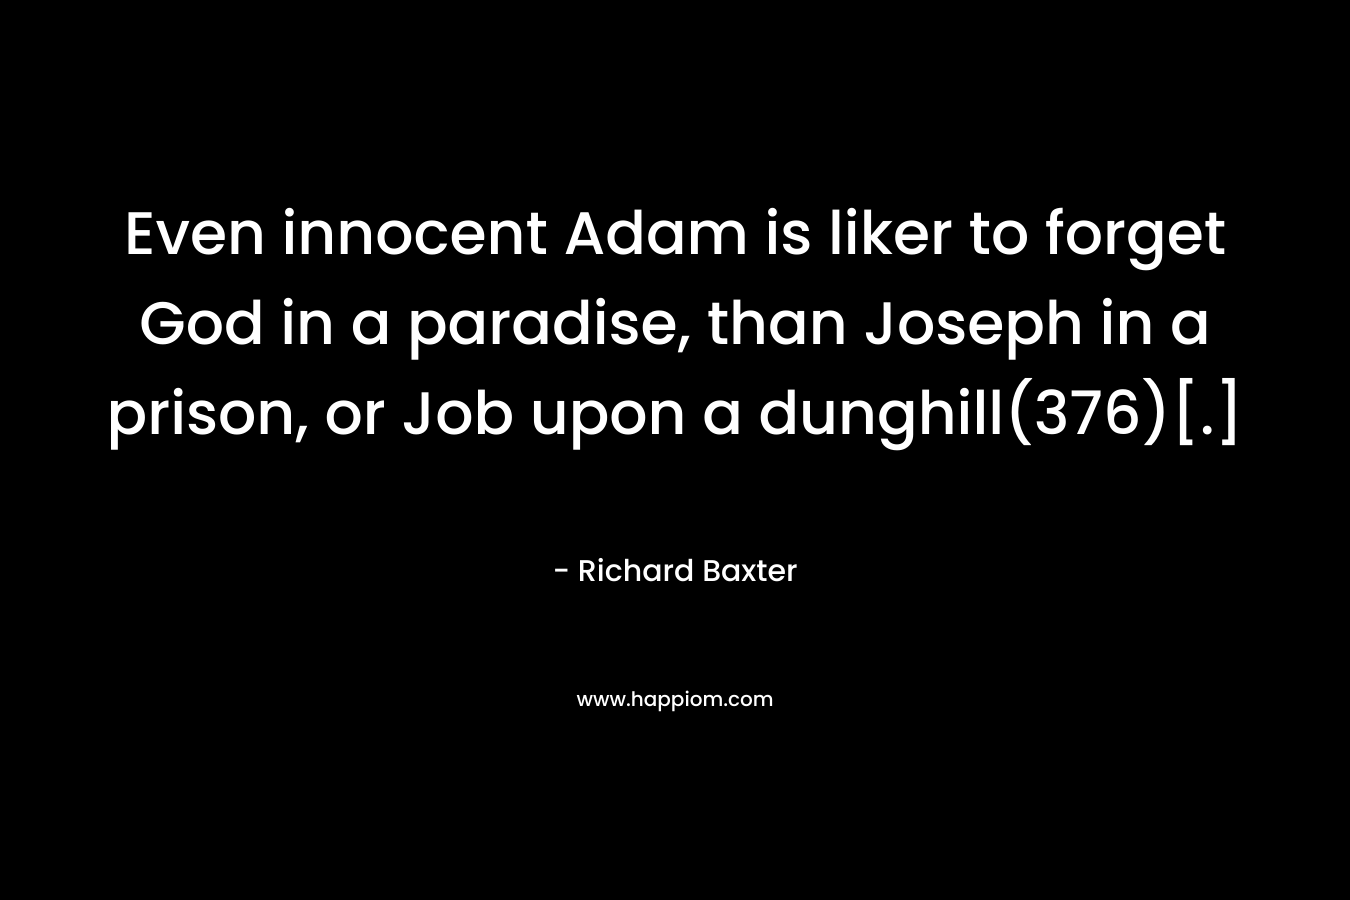 Even innocent Adam is liker to forget God in a paradise, than Joseph in a prison, or Job upon a dunghill(376)[.] – Richard Baxter